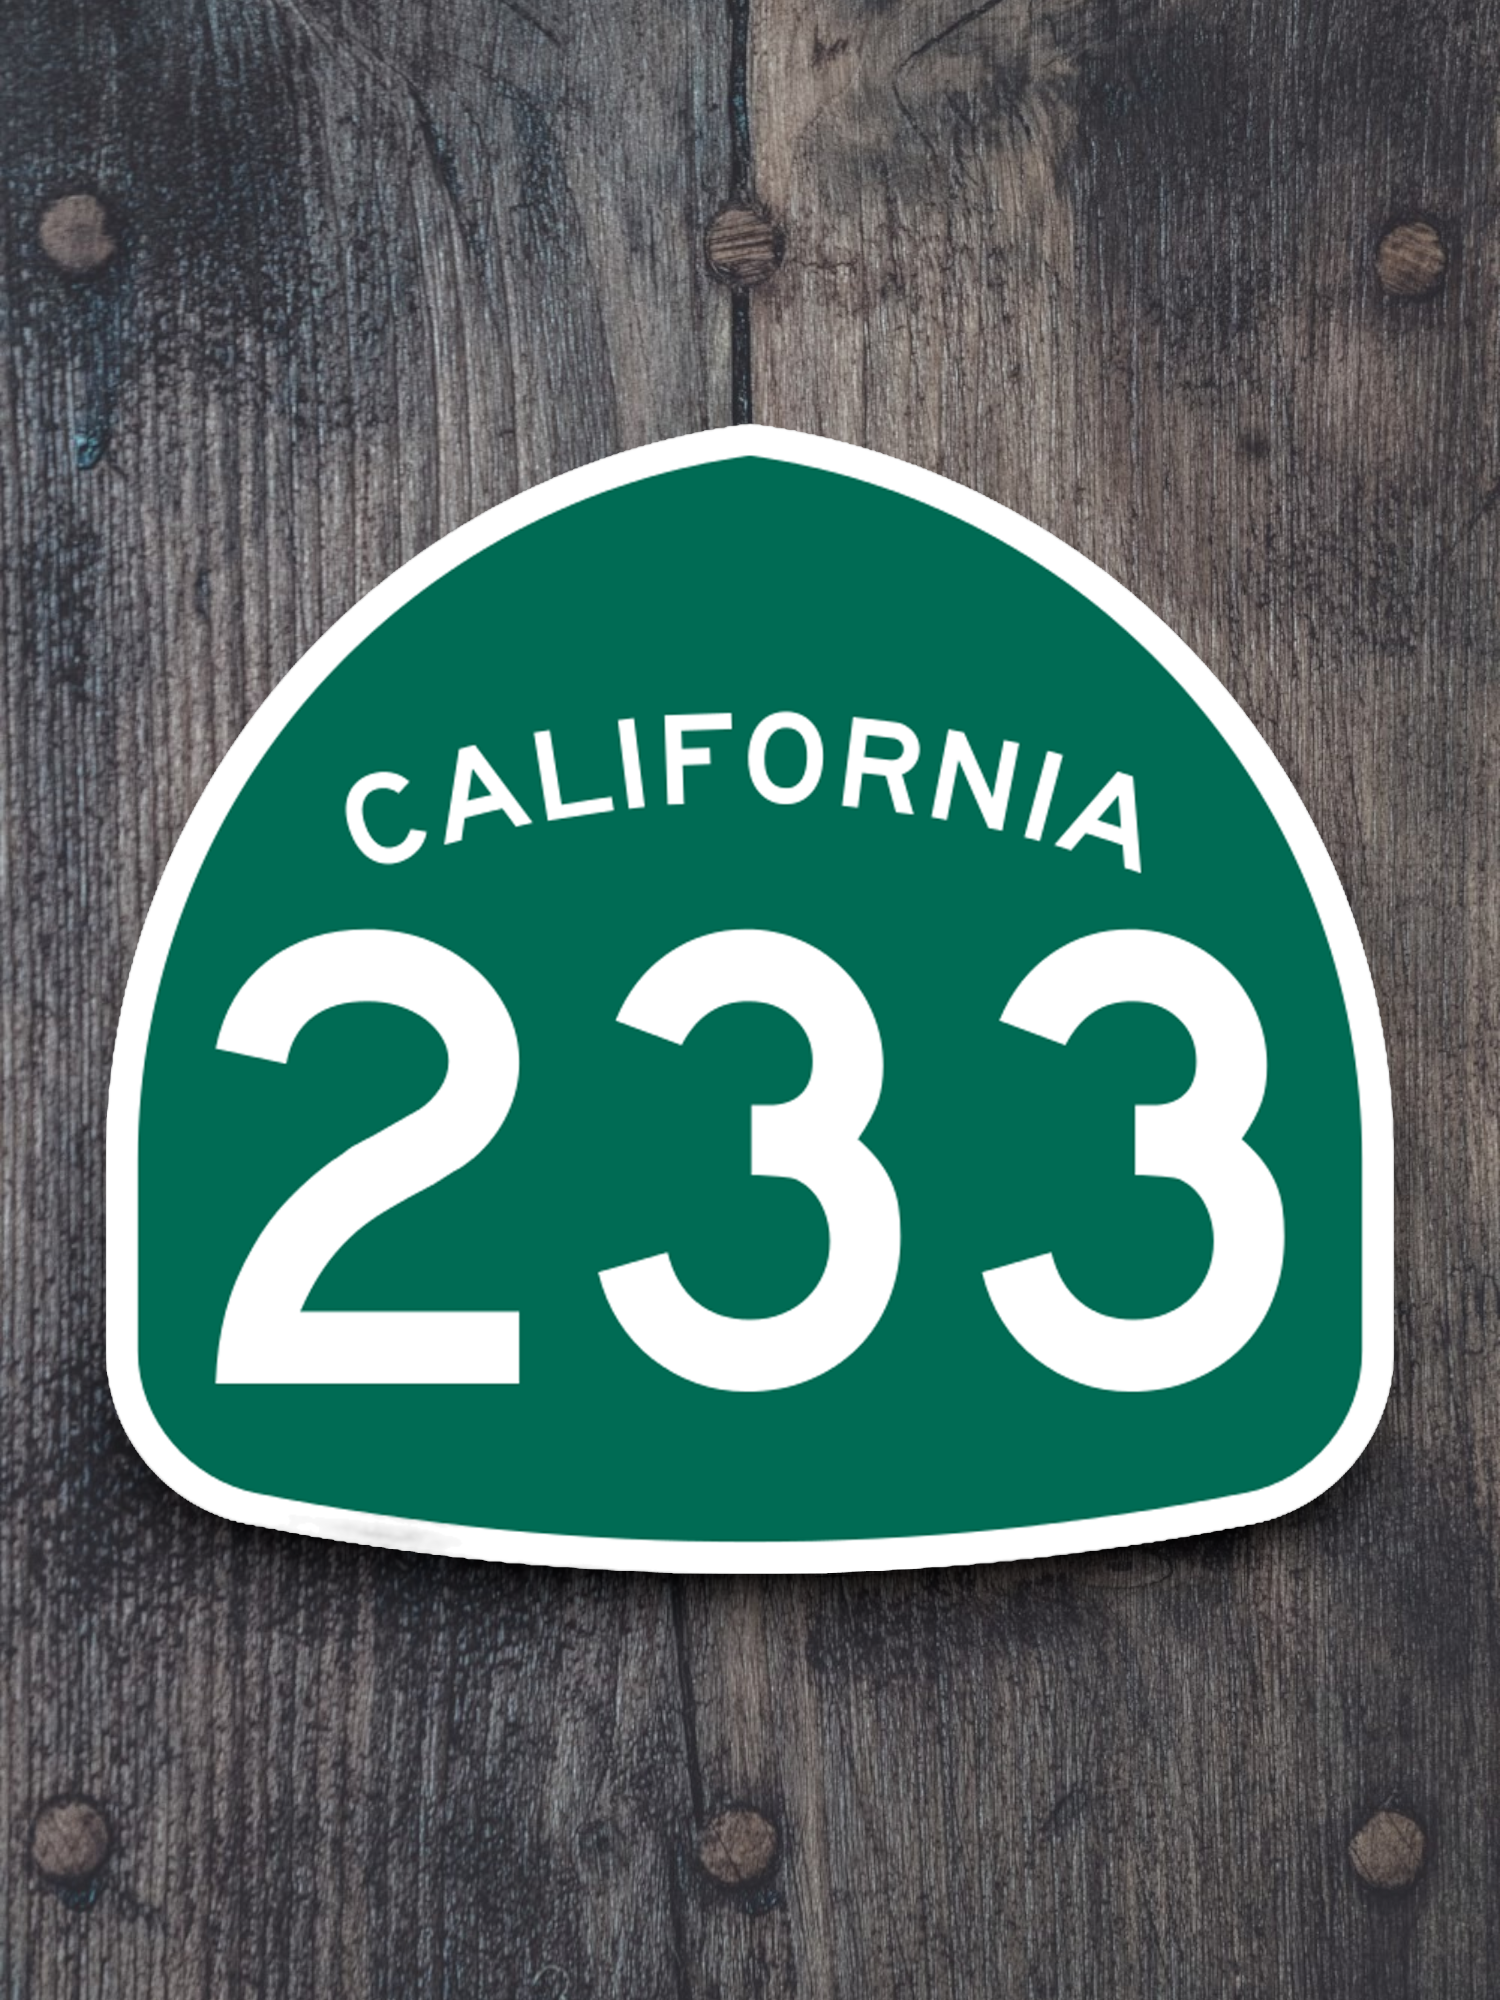 California State Route 233 Road Sign Sticker